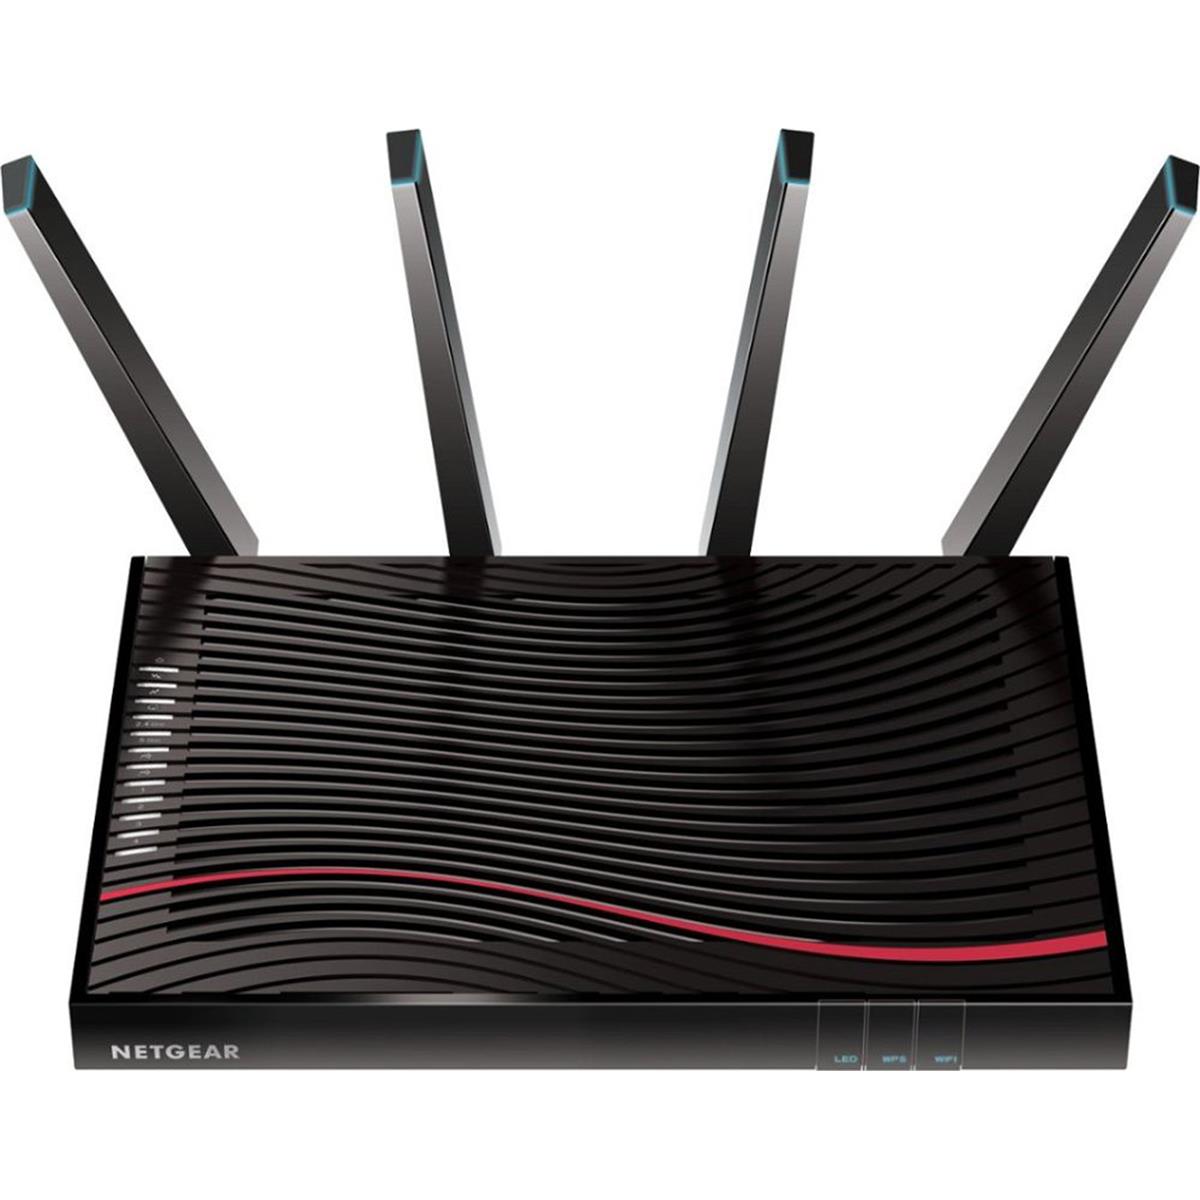 Image of Netgear Nighthawk X4S DOCSIS 3.1 Ultra-High Speed Cable Modem Router